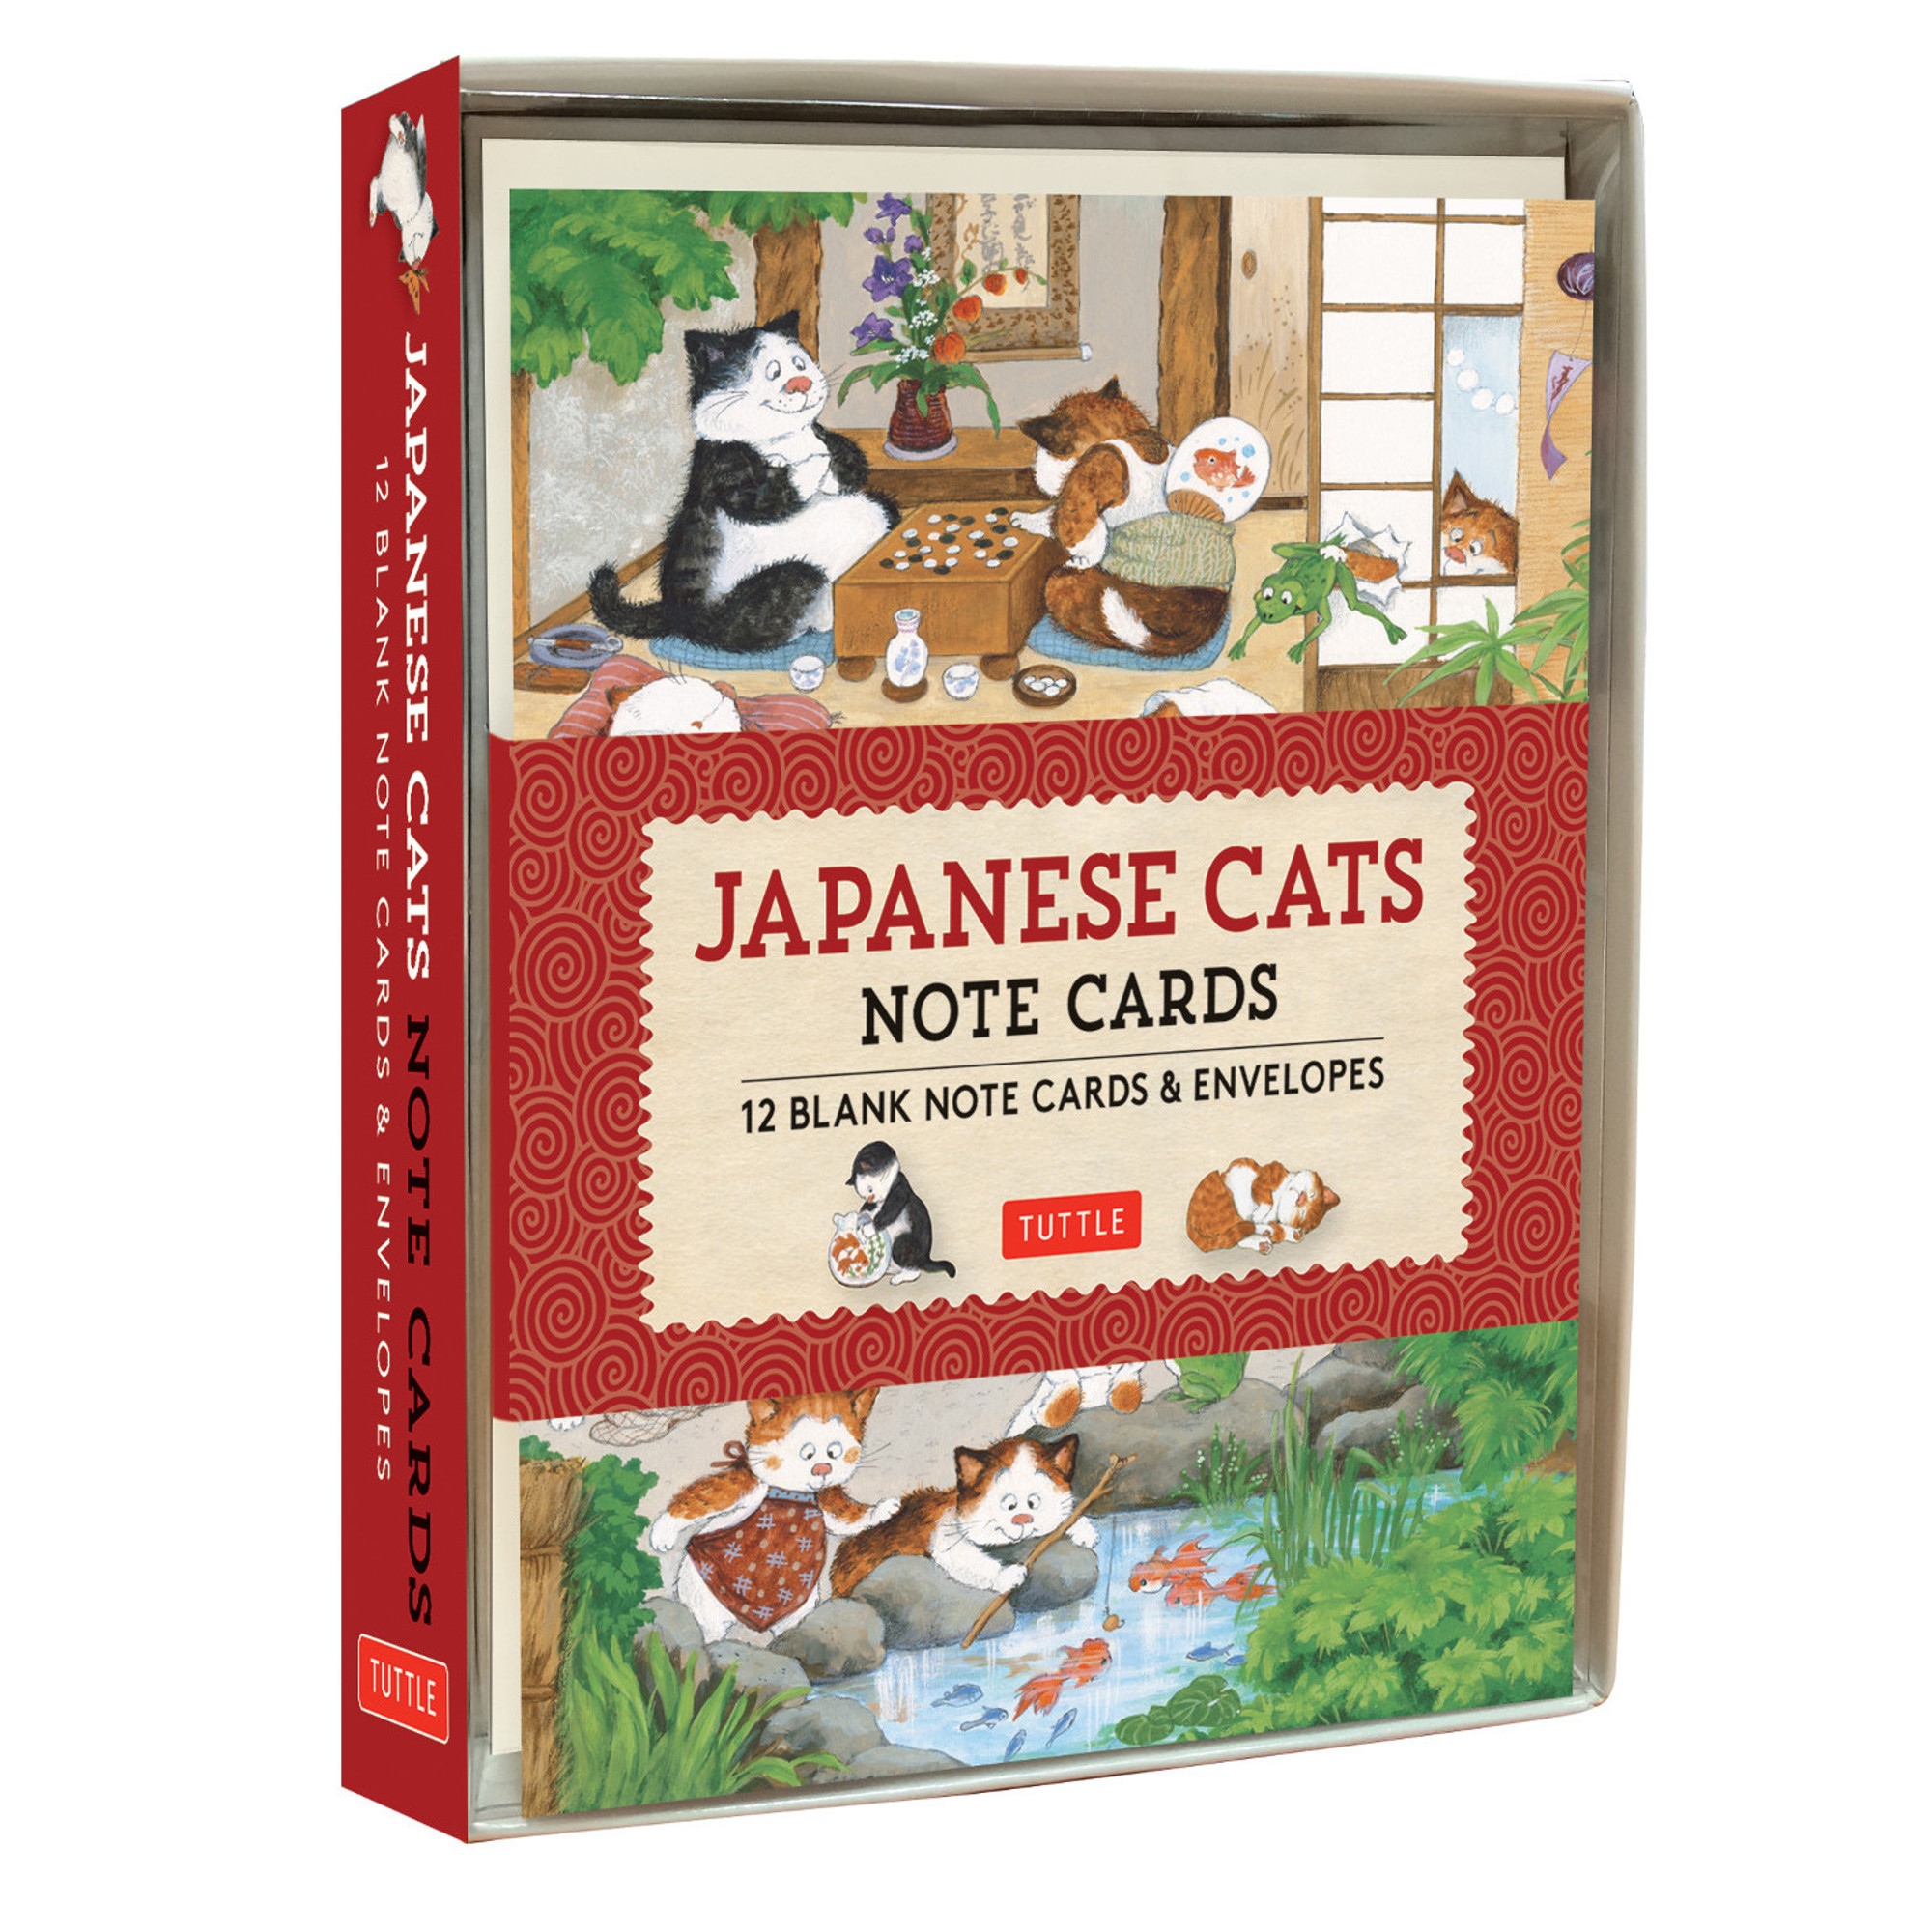 Japanese Cats Note Cards (9780804851879) - Tuttle Publishing